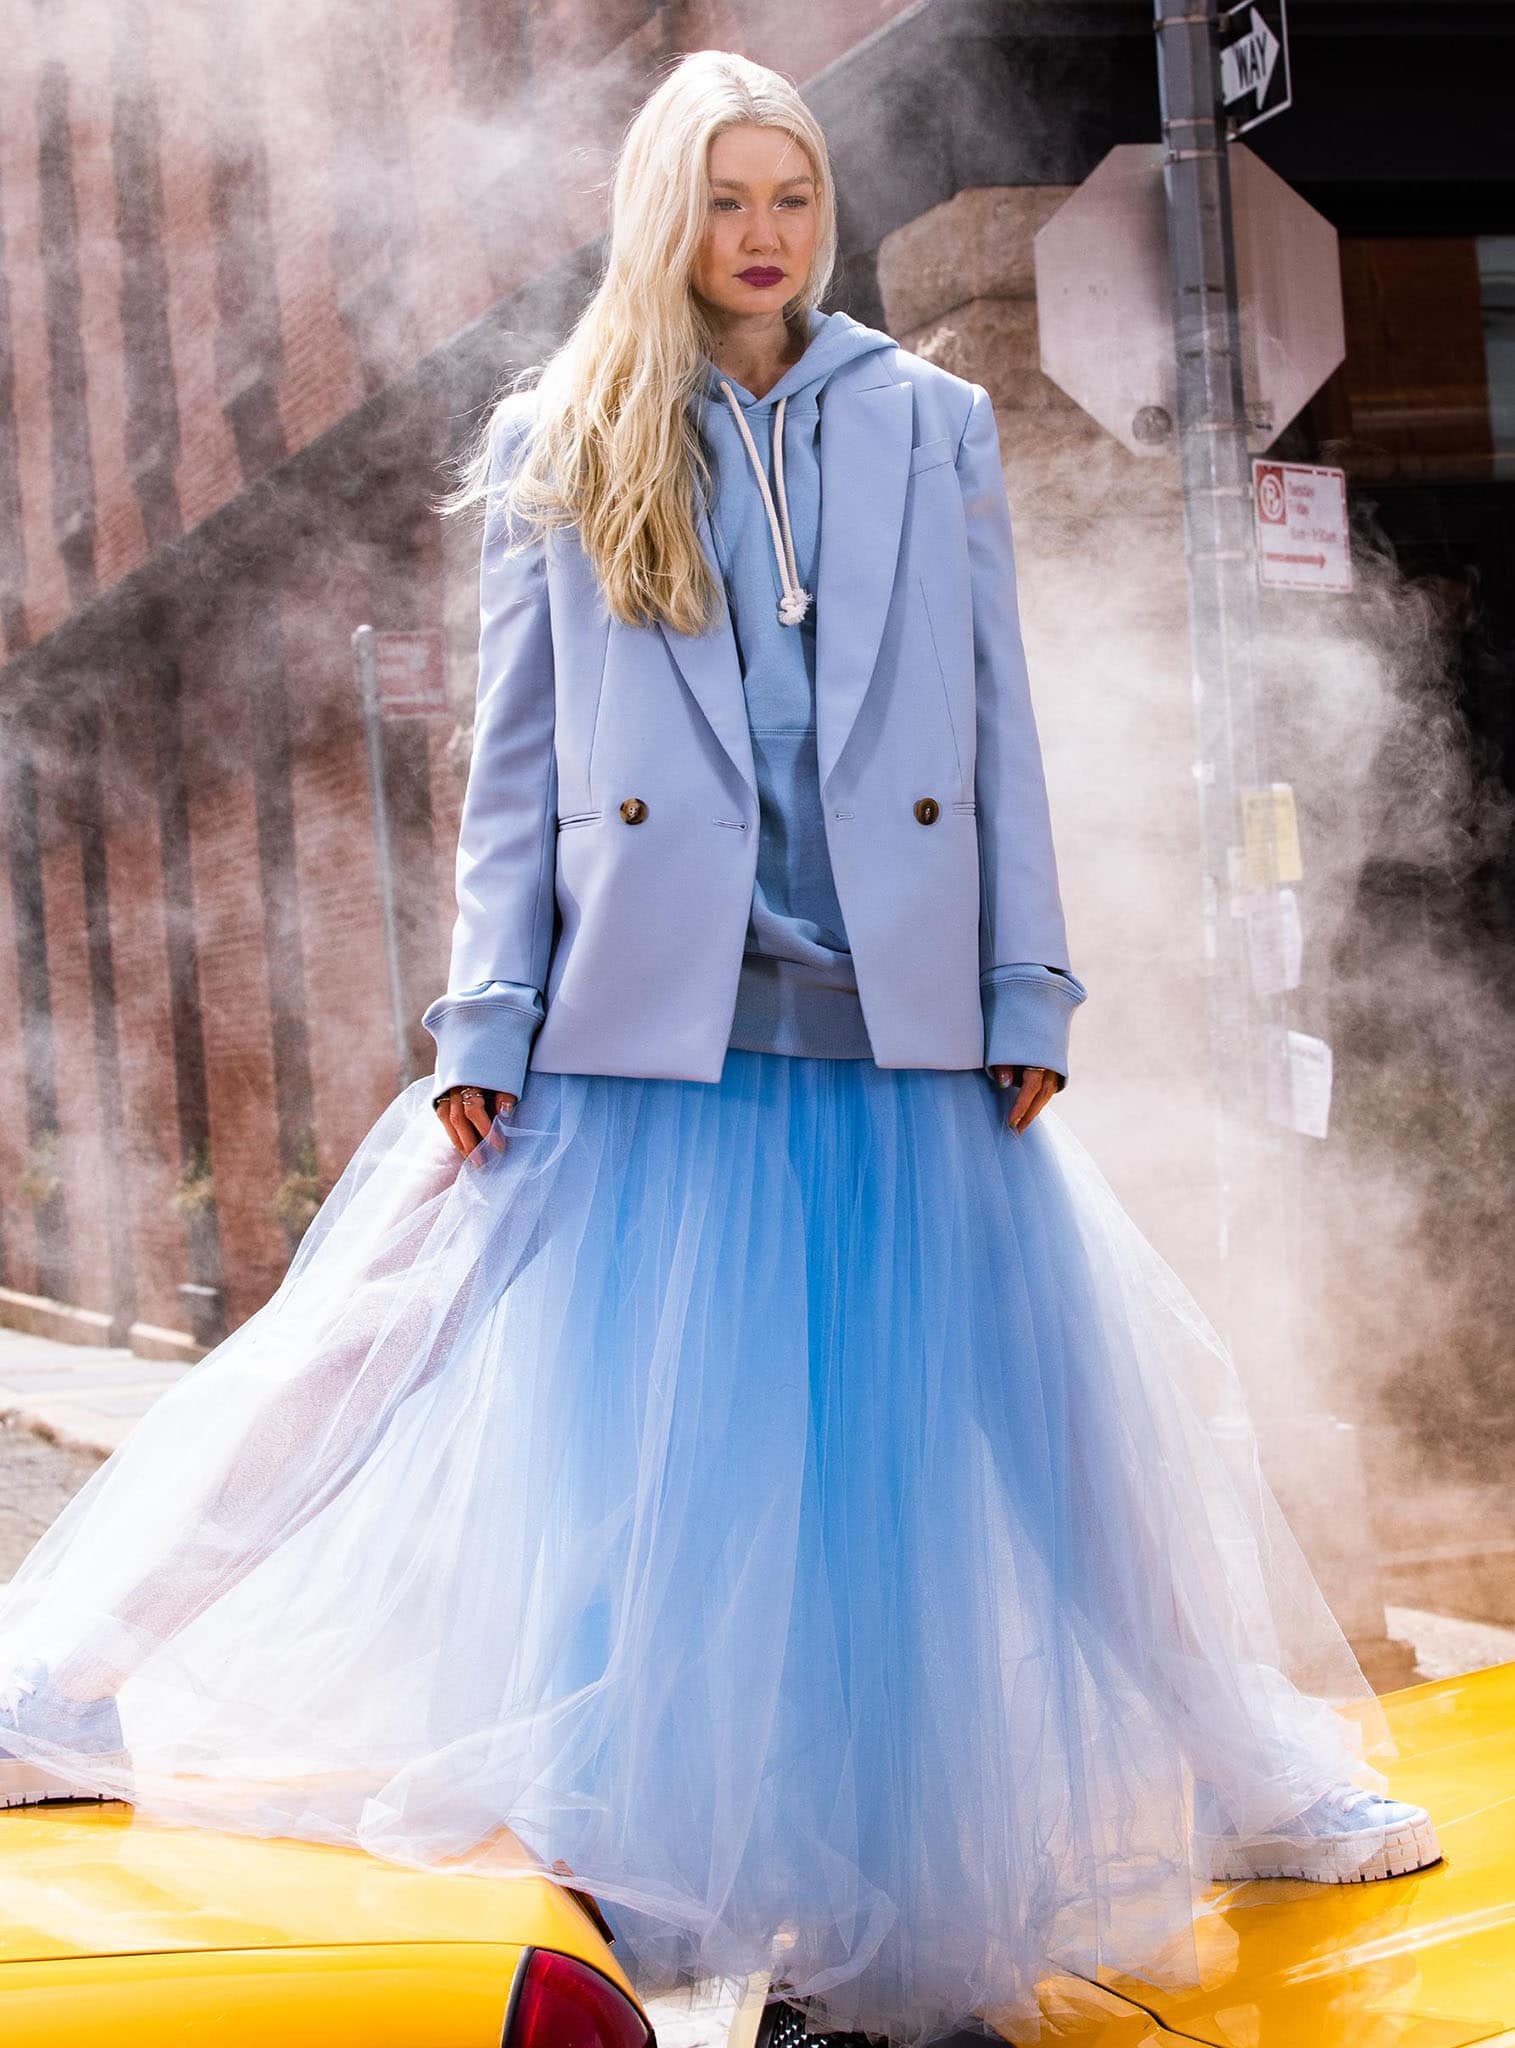 Gigi Hadid channels Carrie Bradshaw in a voluminous blue tulle skirt, a blue hoodie, and a blazer